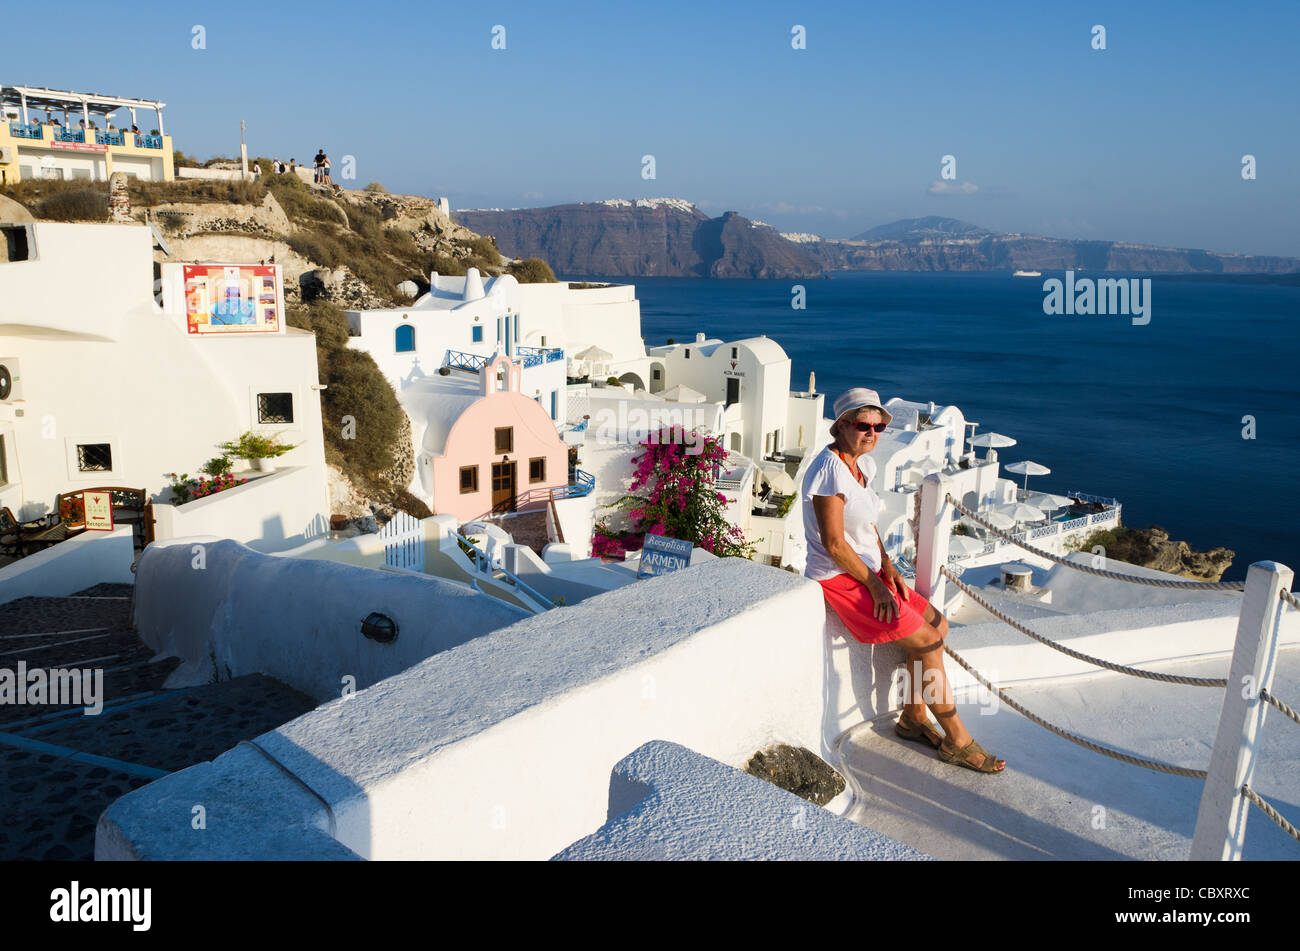 Santorini, Oia, Cyclades Islands, Greece, view with an elderly woman sitting on stoop, overlooking the ocean Stock Photo